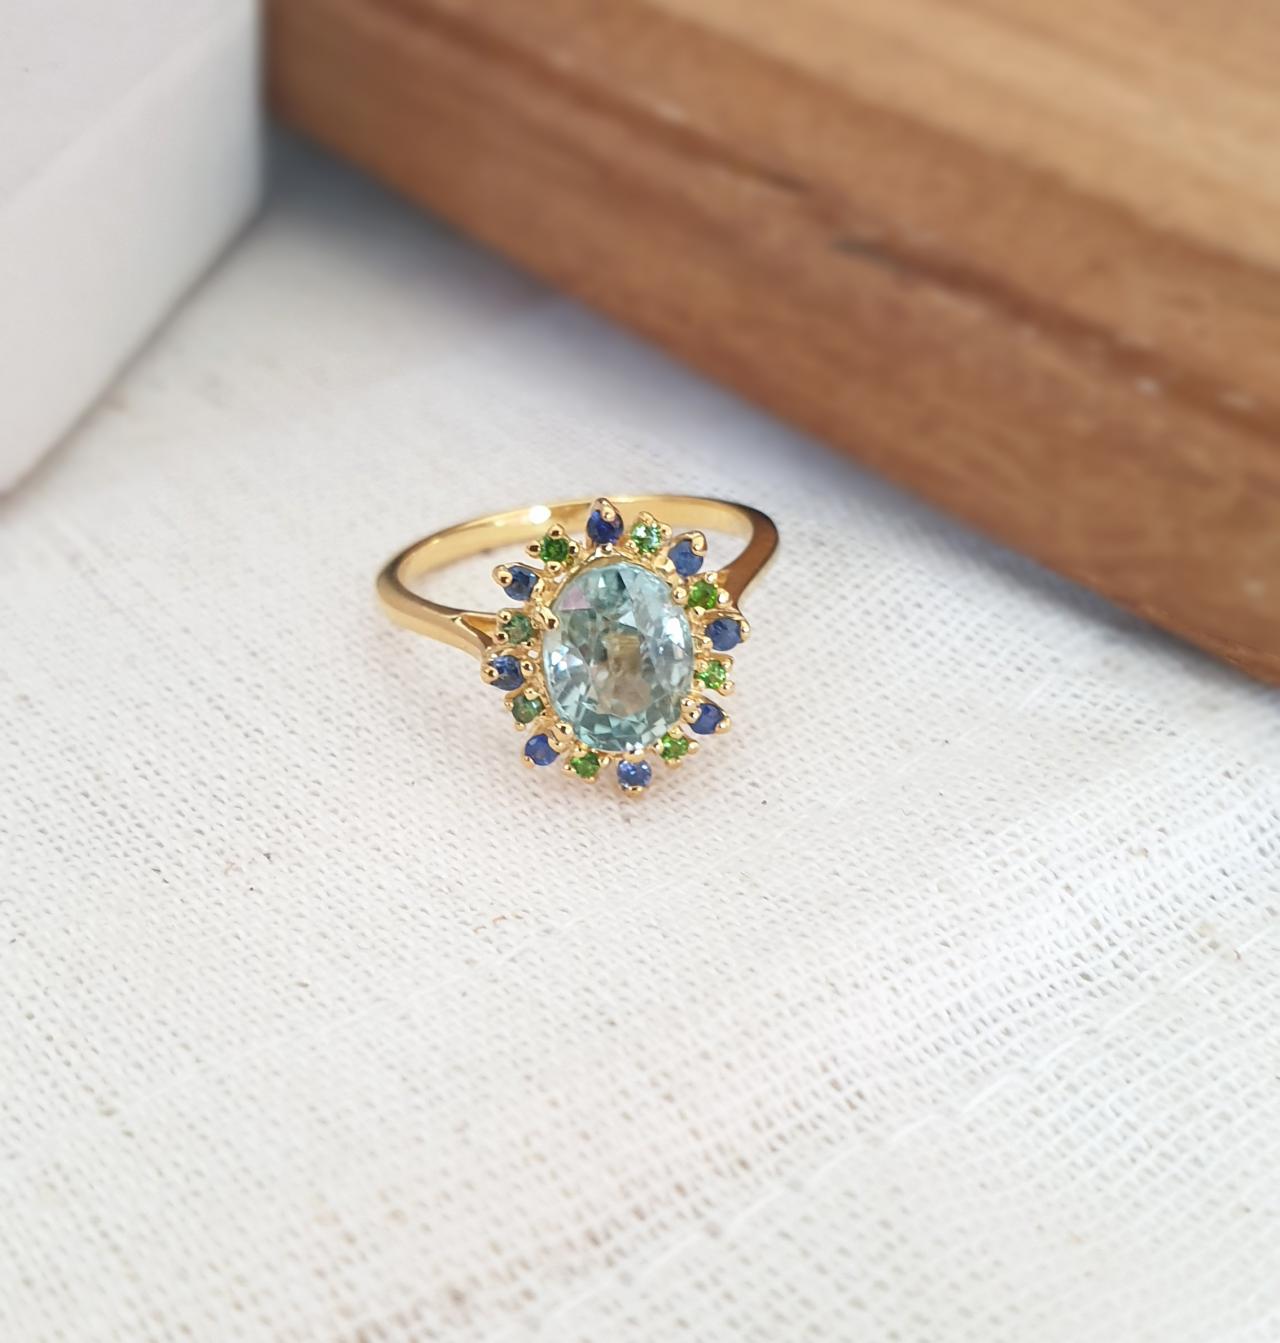 Blue Aquamarine Gemstone With Fancy Color Gemstones, Silver Solitaire Ring For Her, Pastel Color Gemstones For Anniversary Day, Wedding Ring